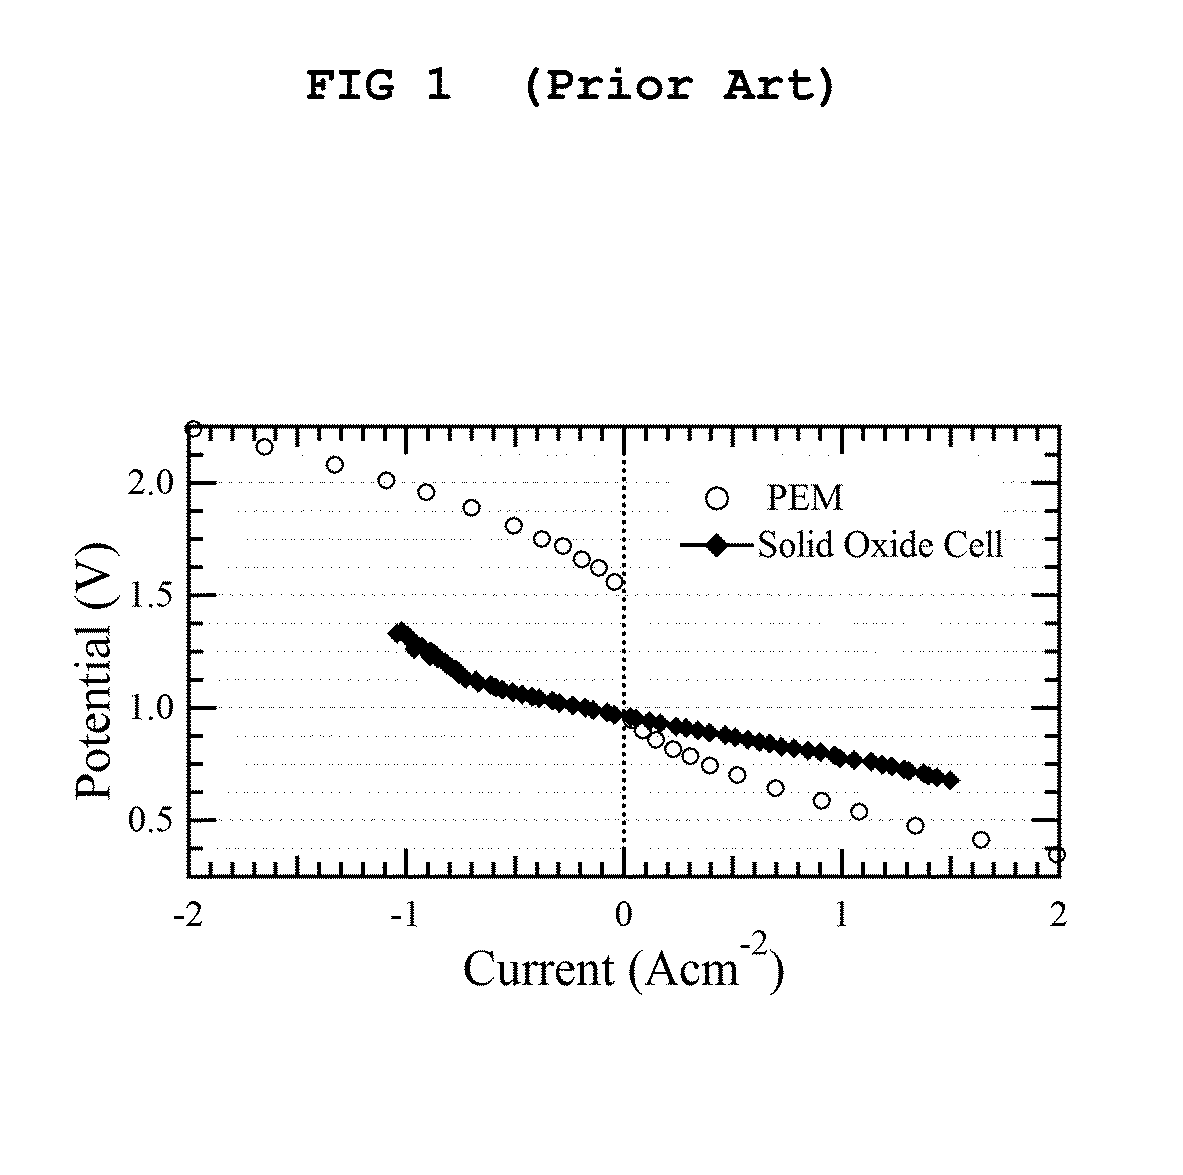 Method for improving the efficiency and durability of electrical energy storage using solid oxide electrolysis cell